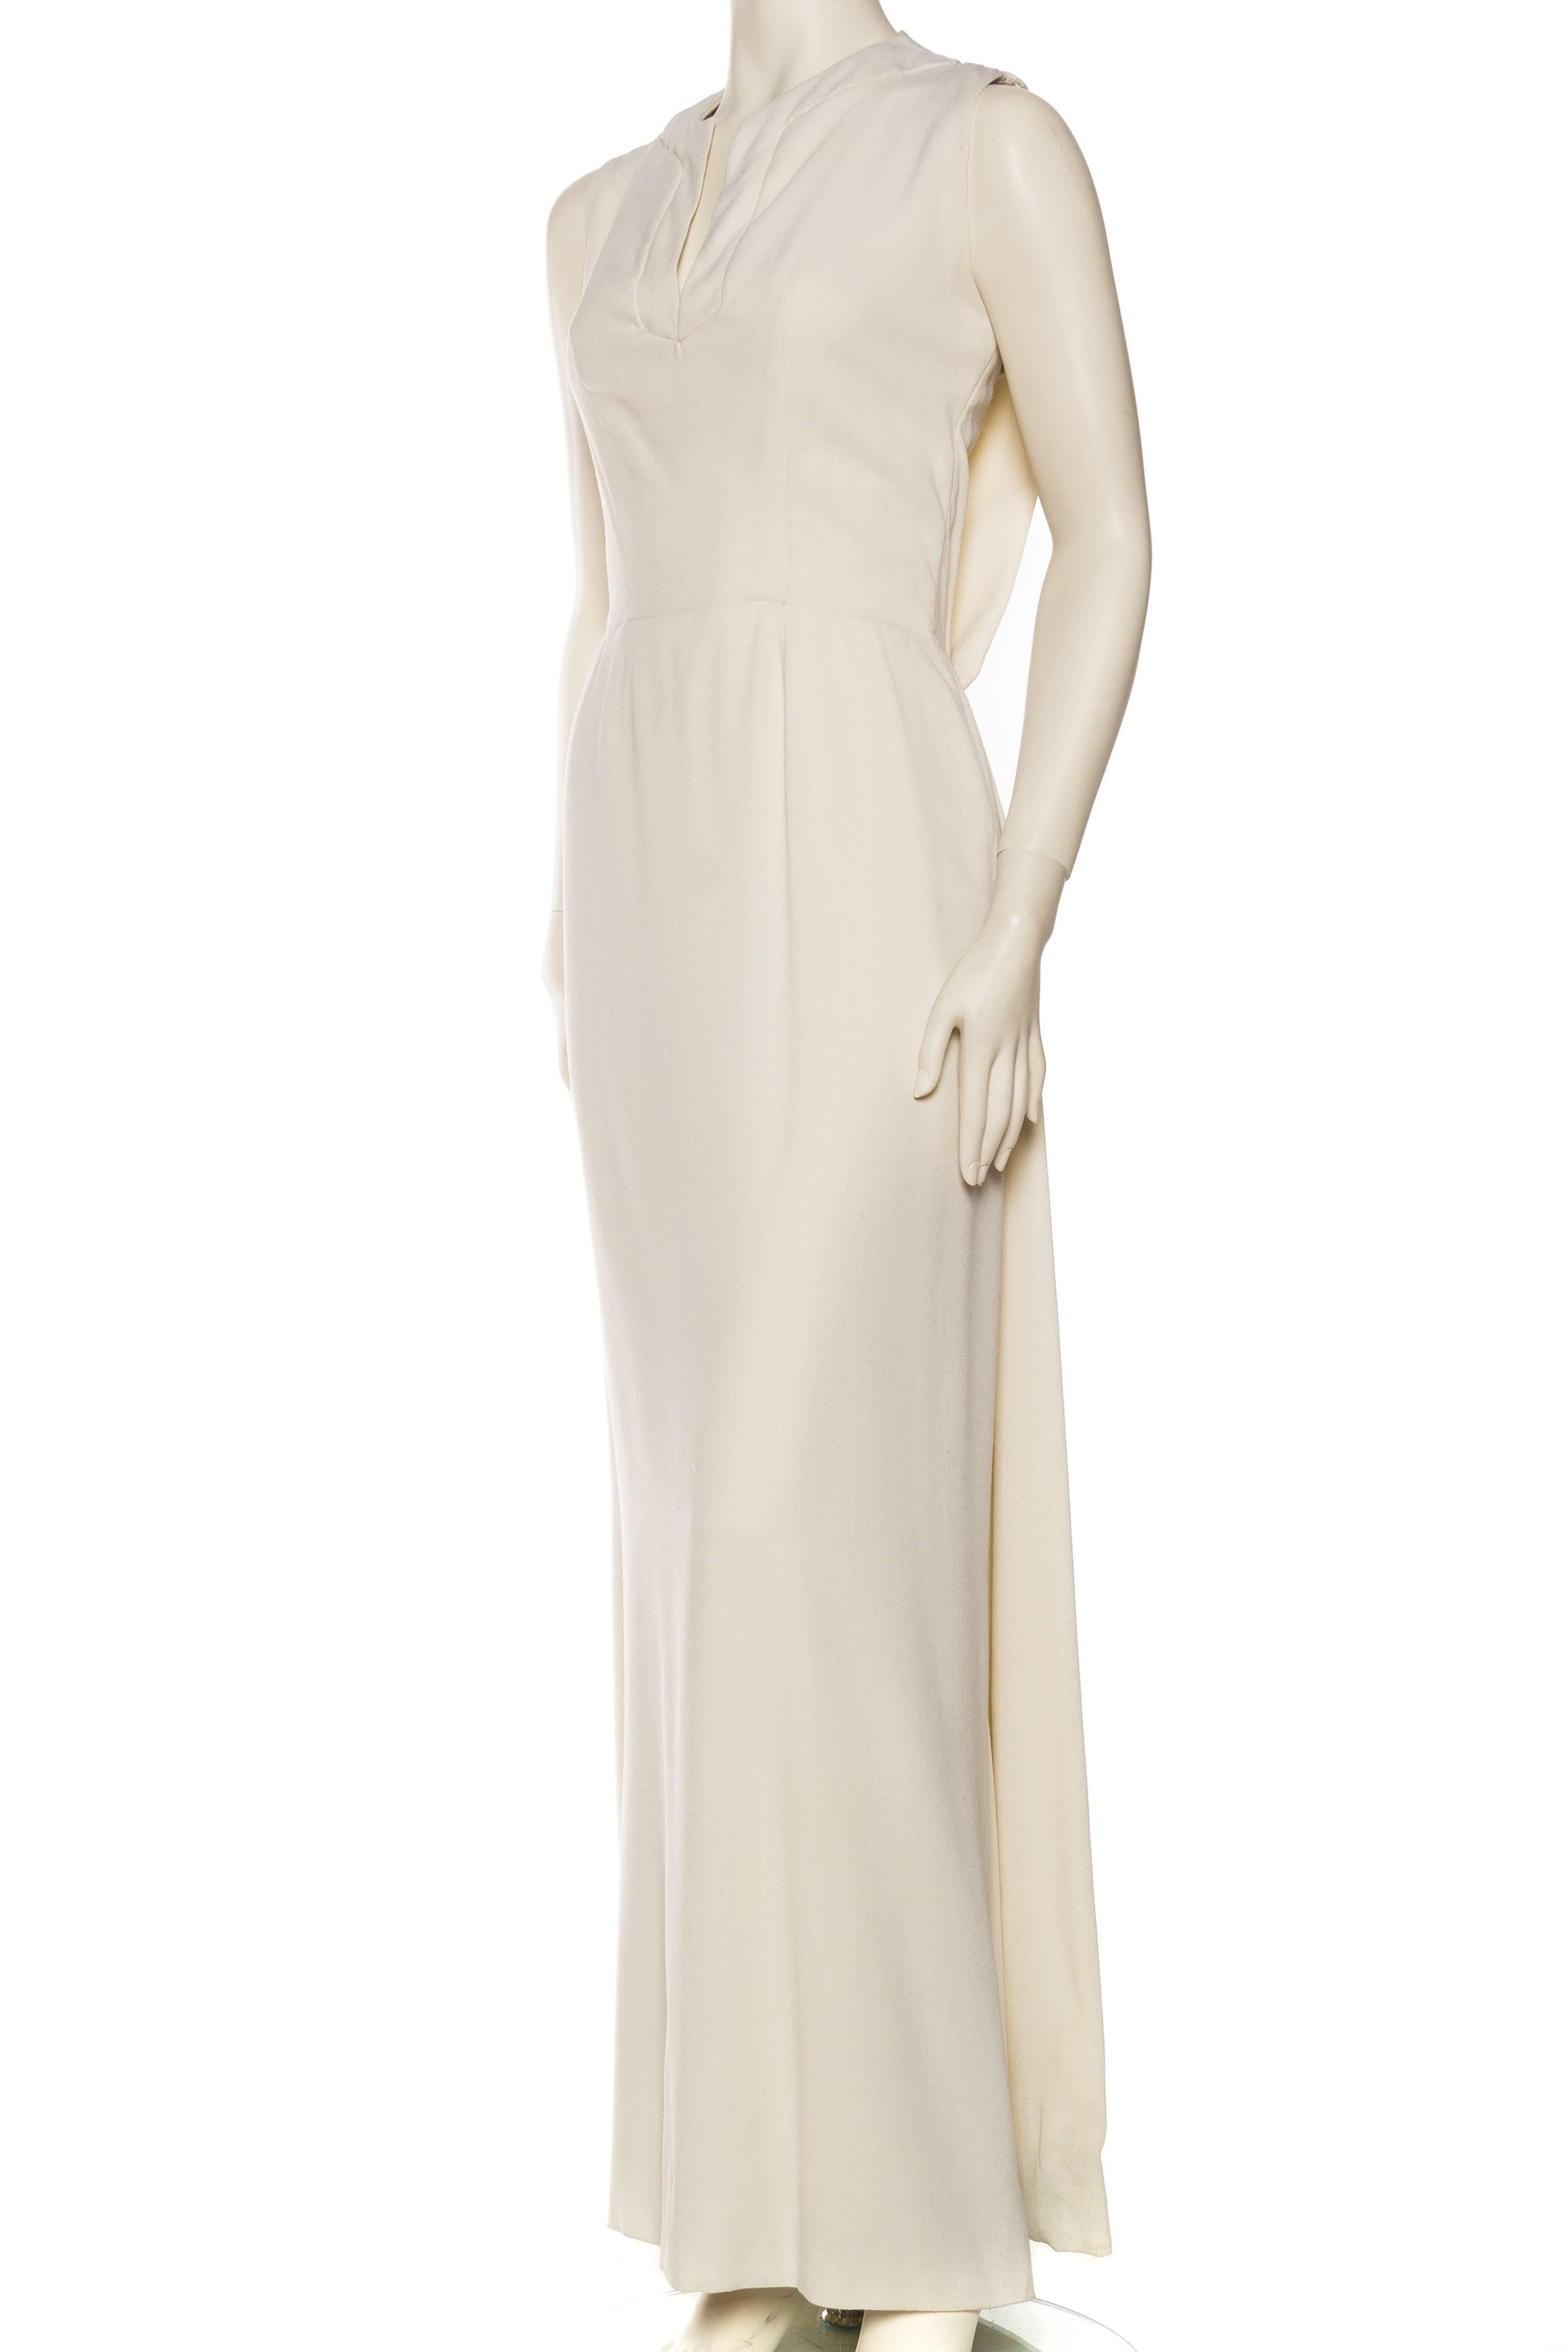 1960S PIERRE BALMAIN Off White Rayon and Silk Crepe Modernist Gown With ...